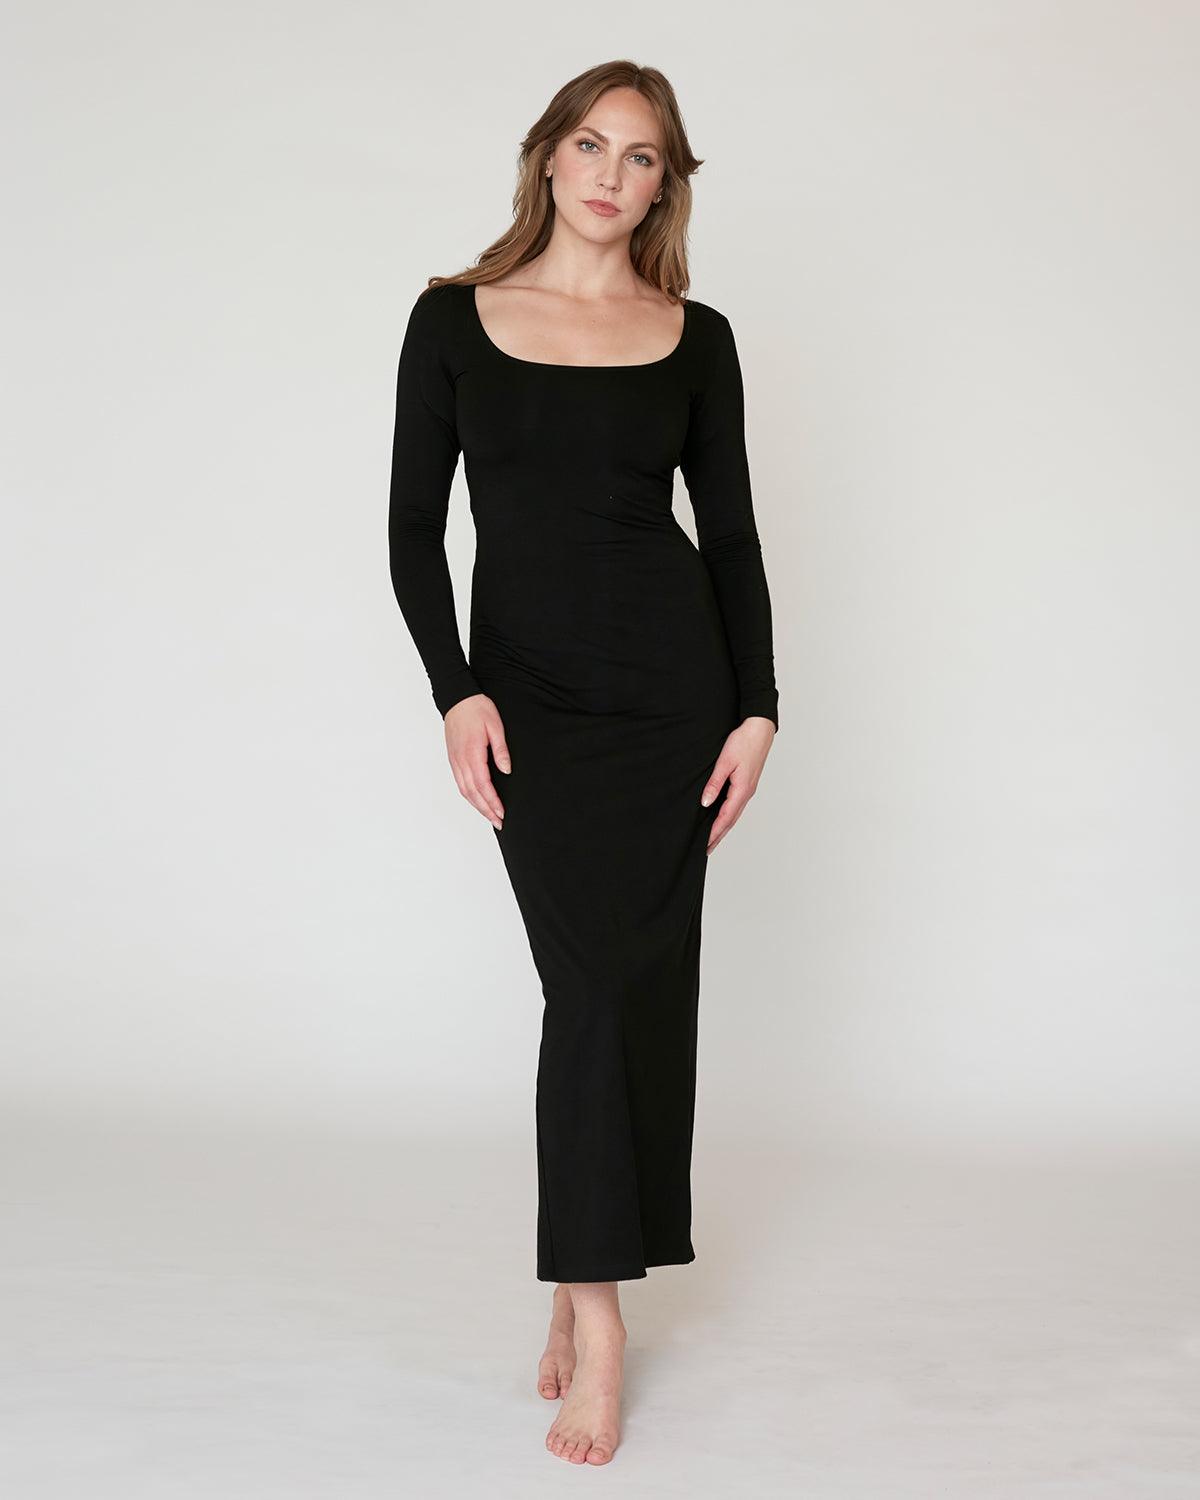 The Long Sleeve Square Neck Dress